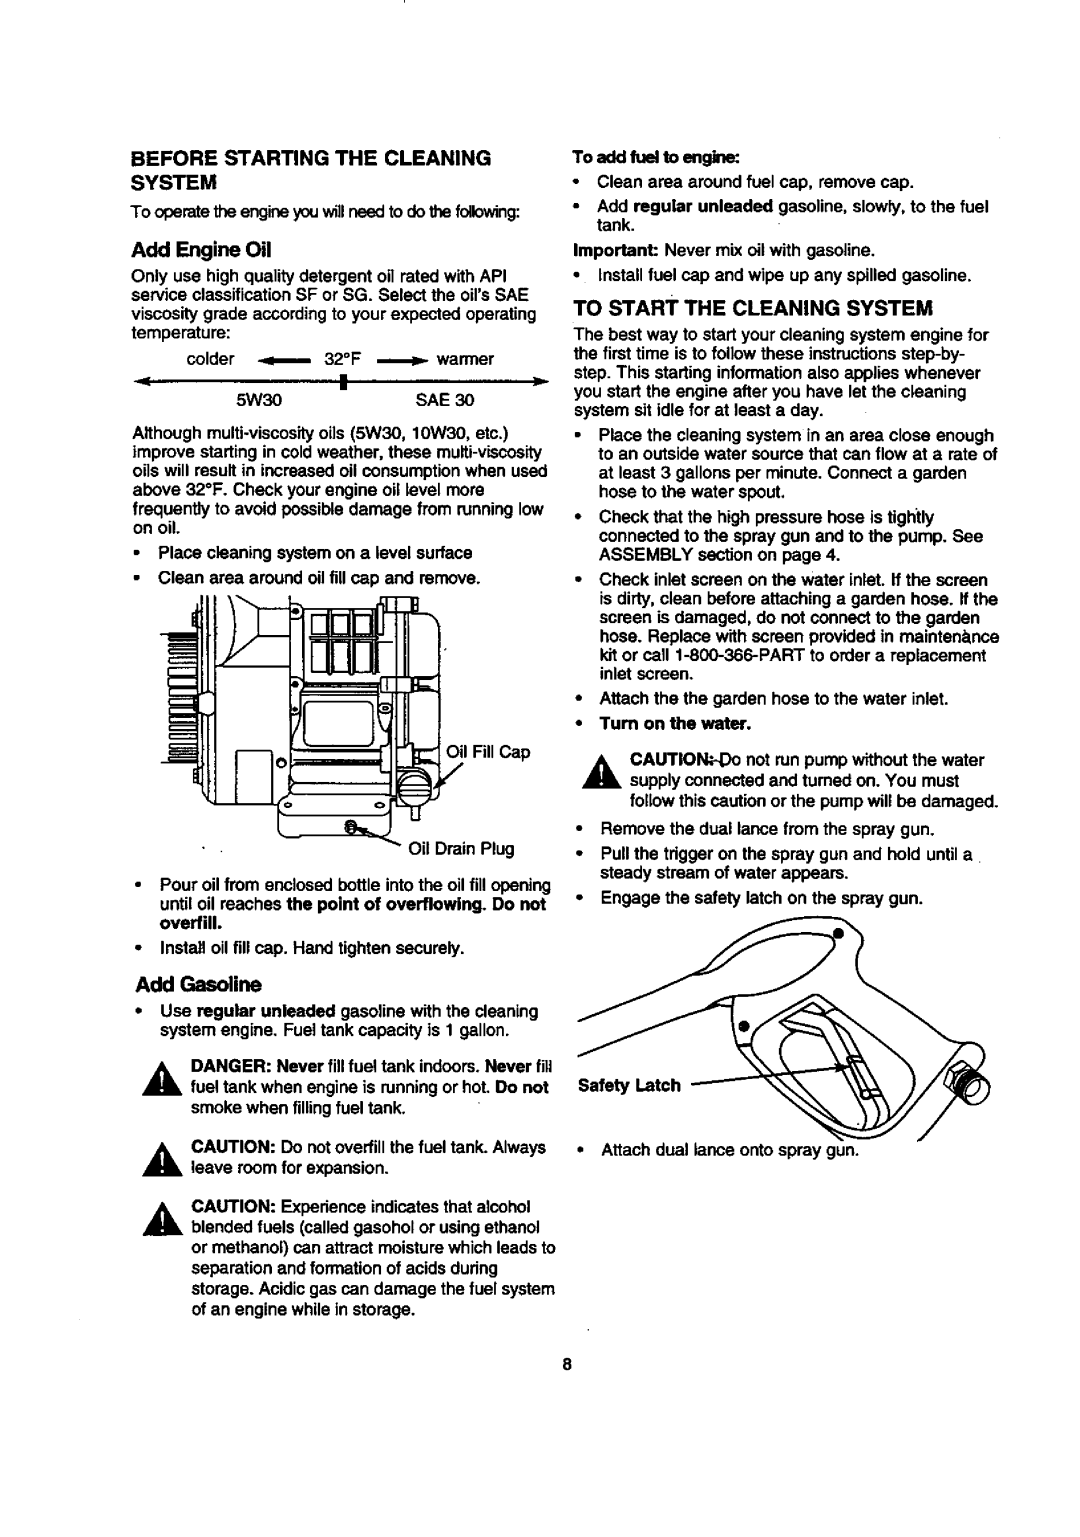 Sears 580.768050 manual To Start The Cleaning System 